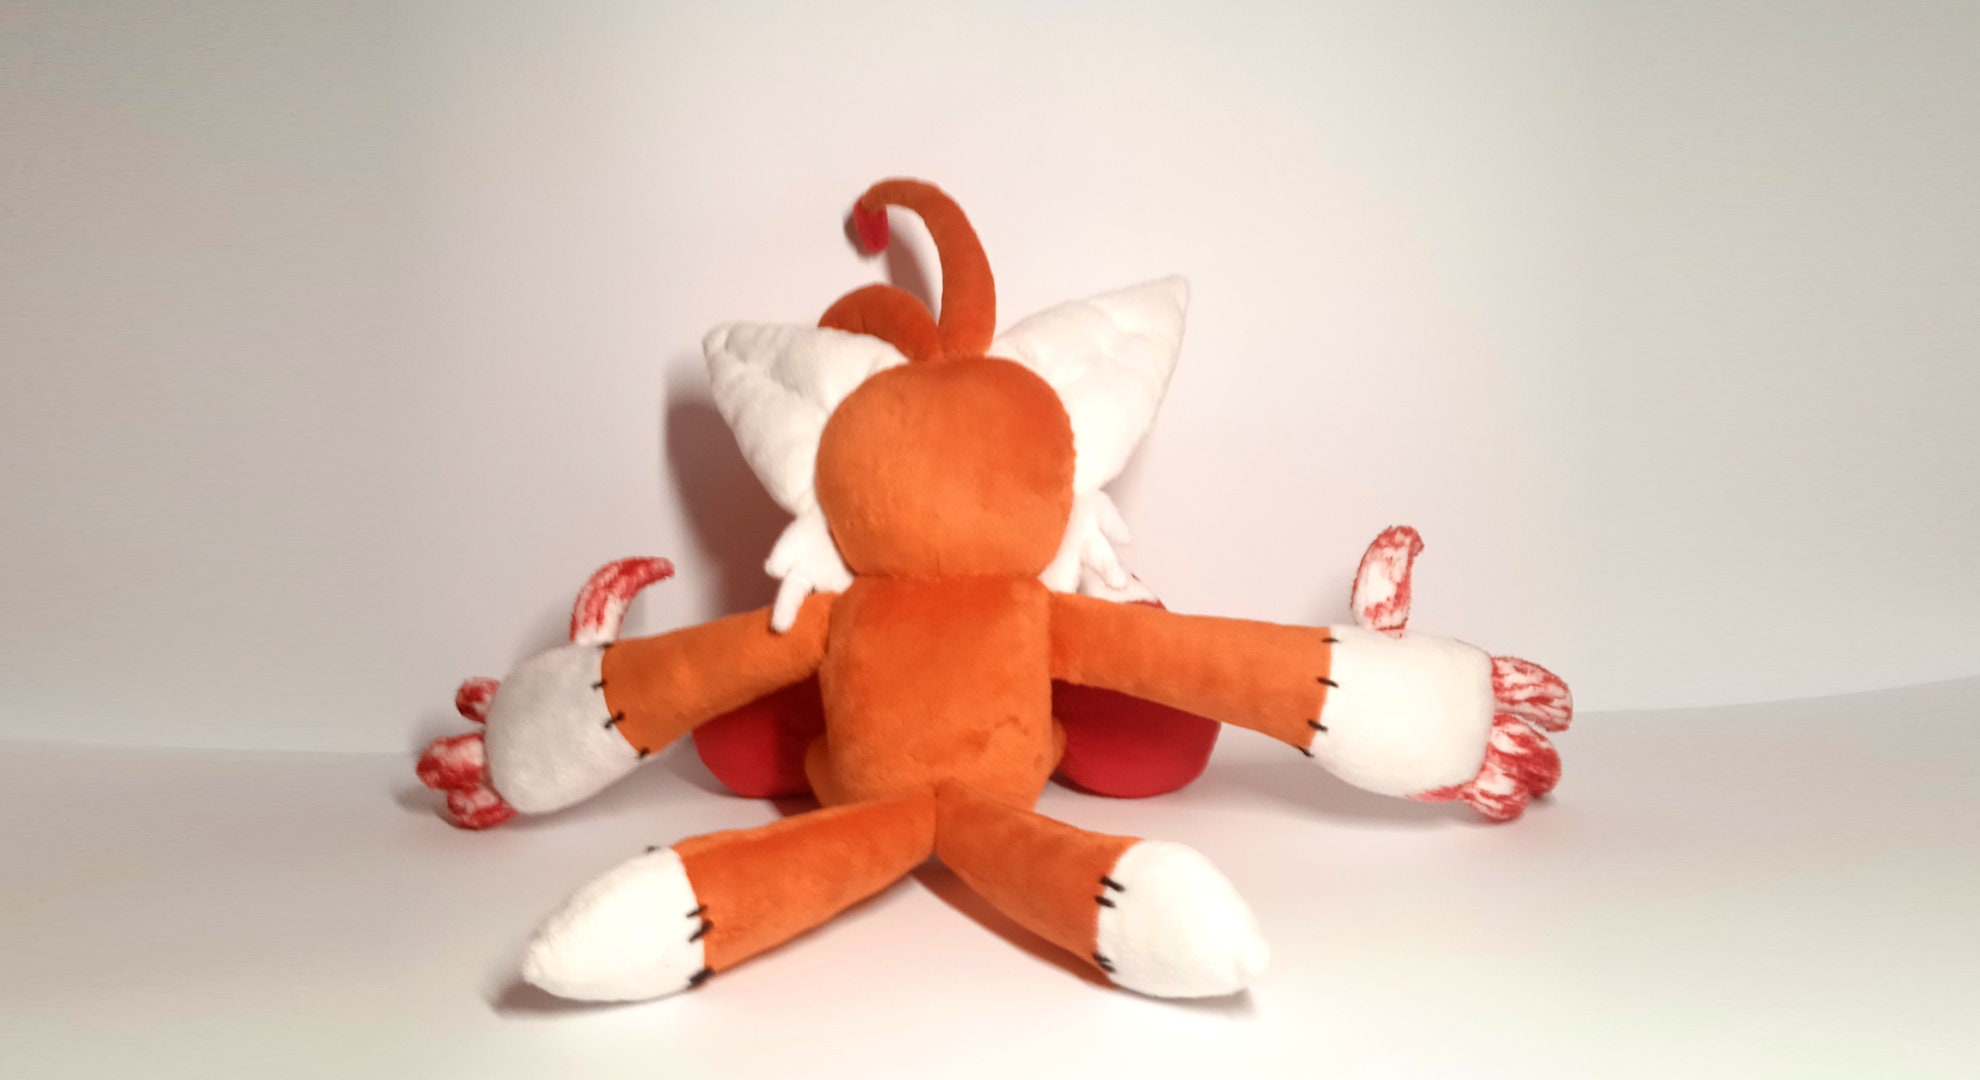 Strange, Isn't It? — Tails Doll is simply a plush toy attached to a